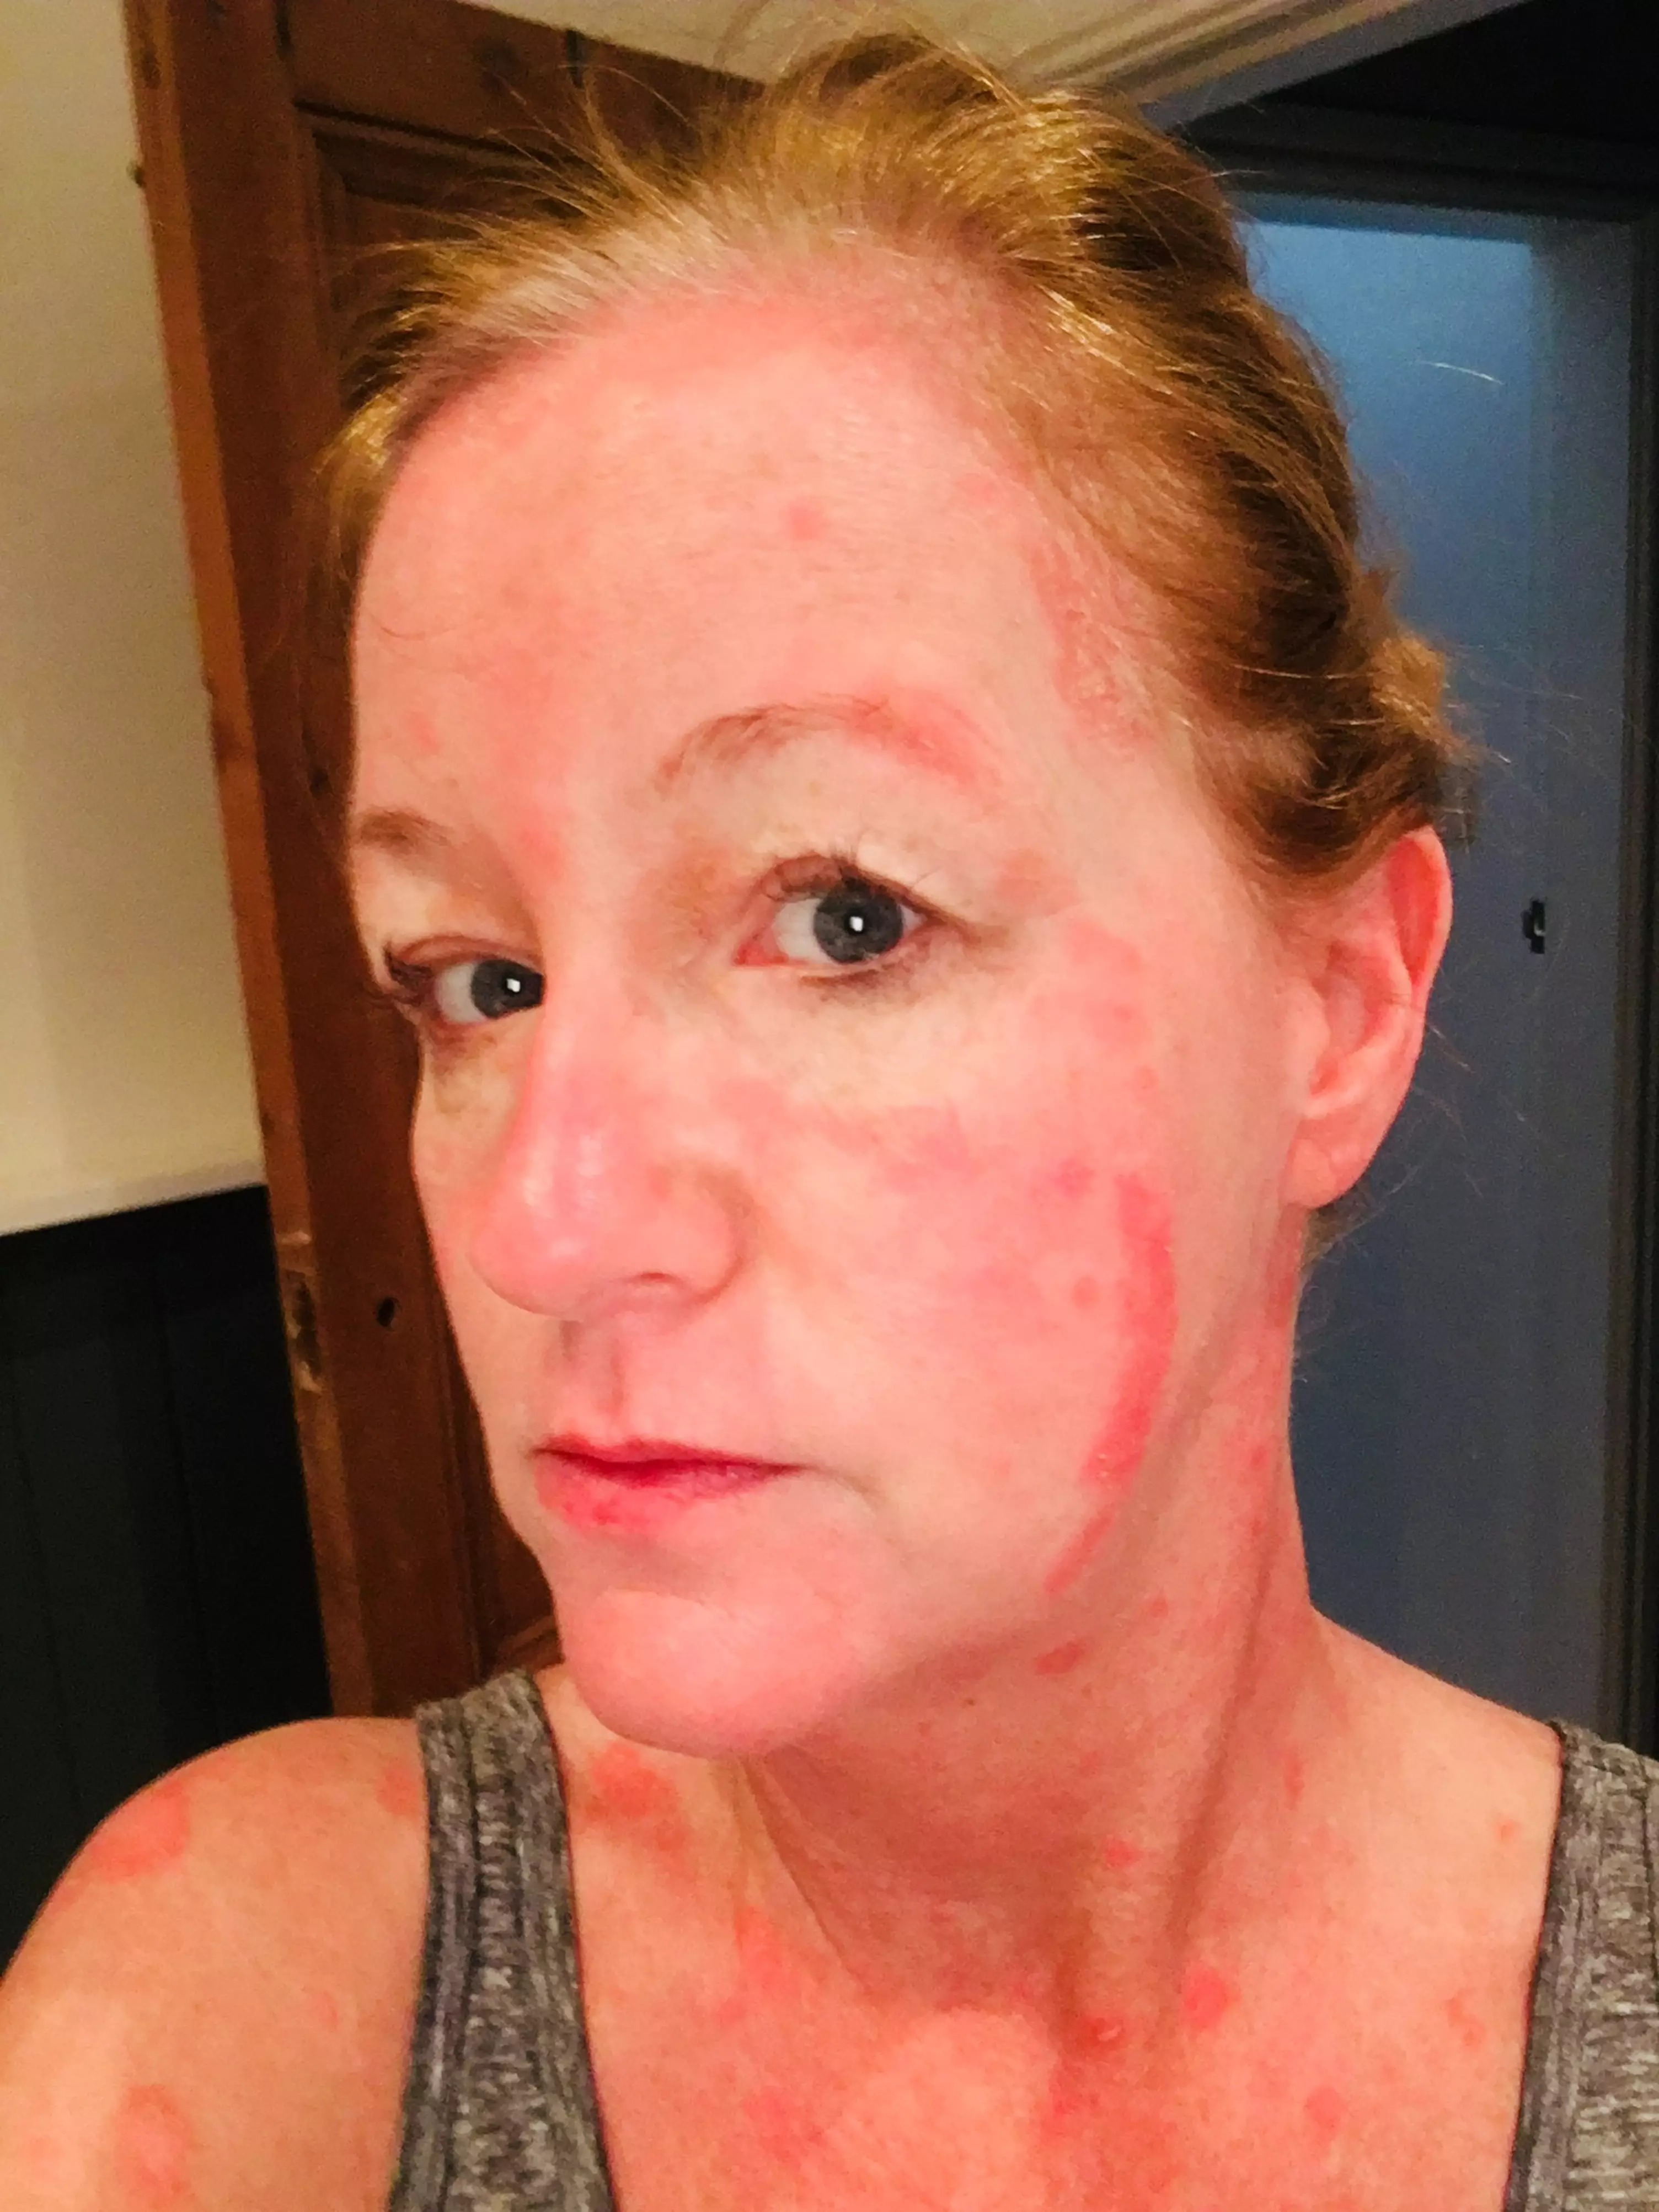 The Preston native explained how the skin condition hindered her daily life.